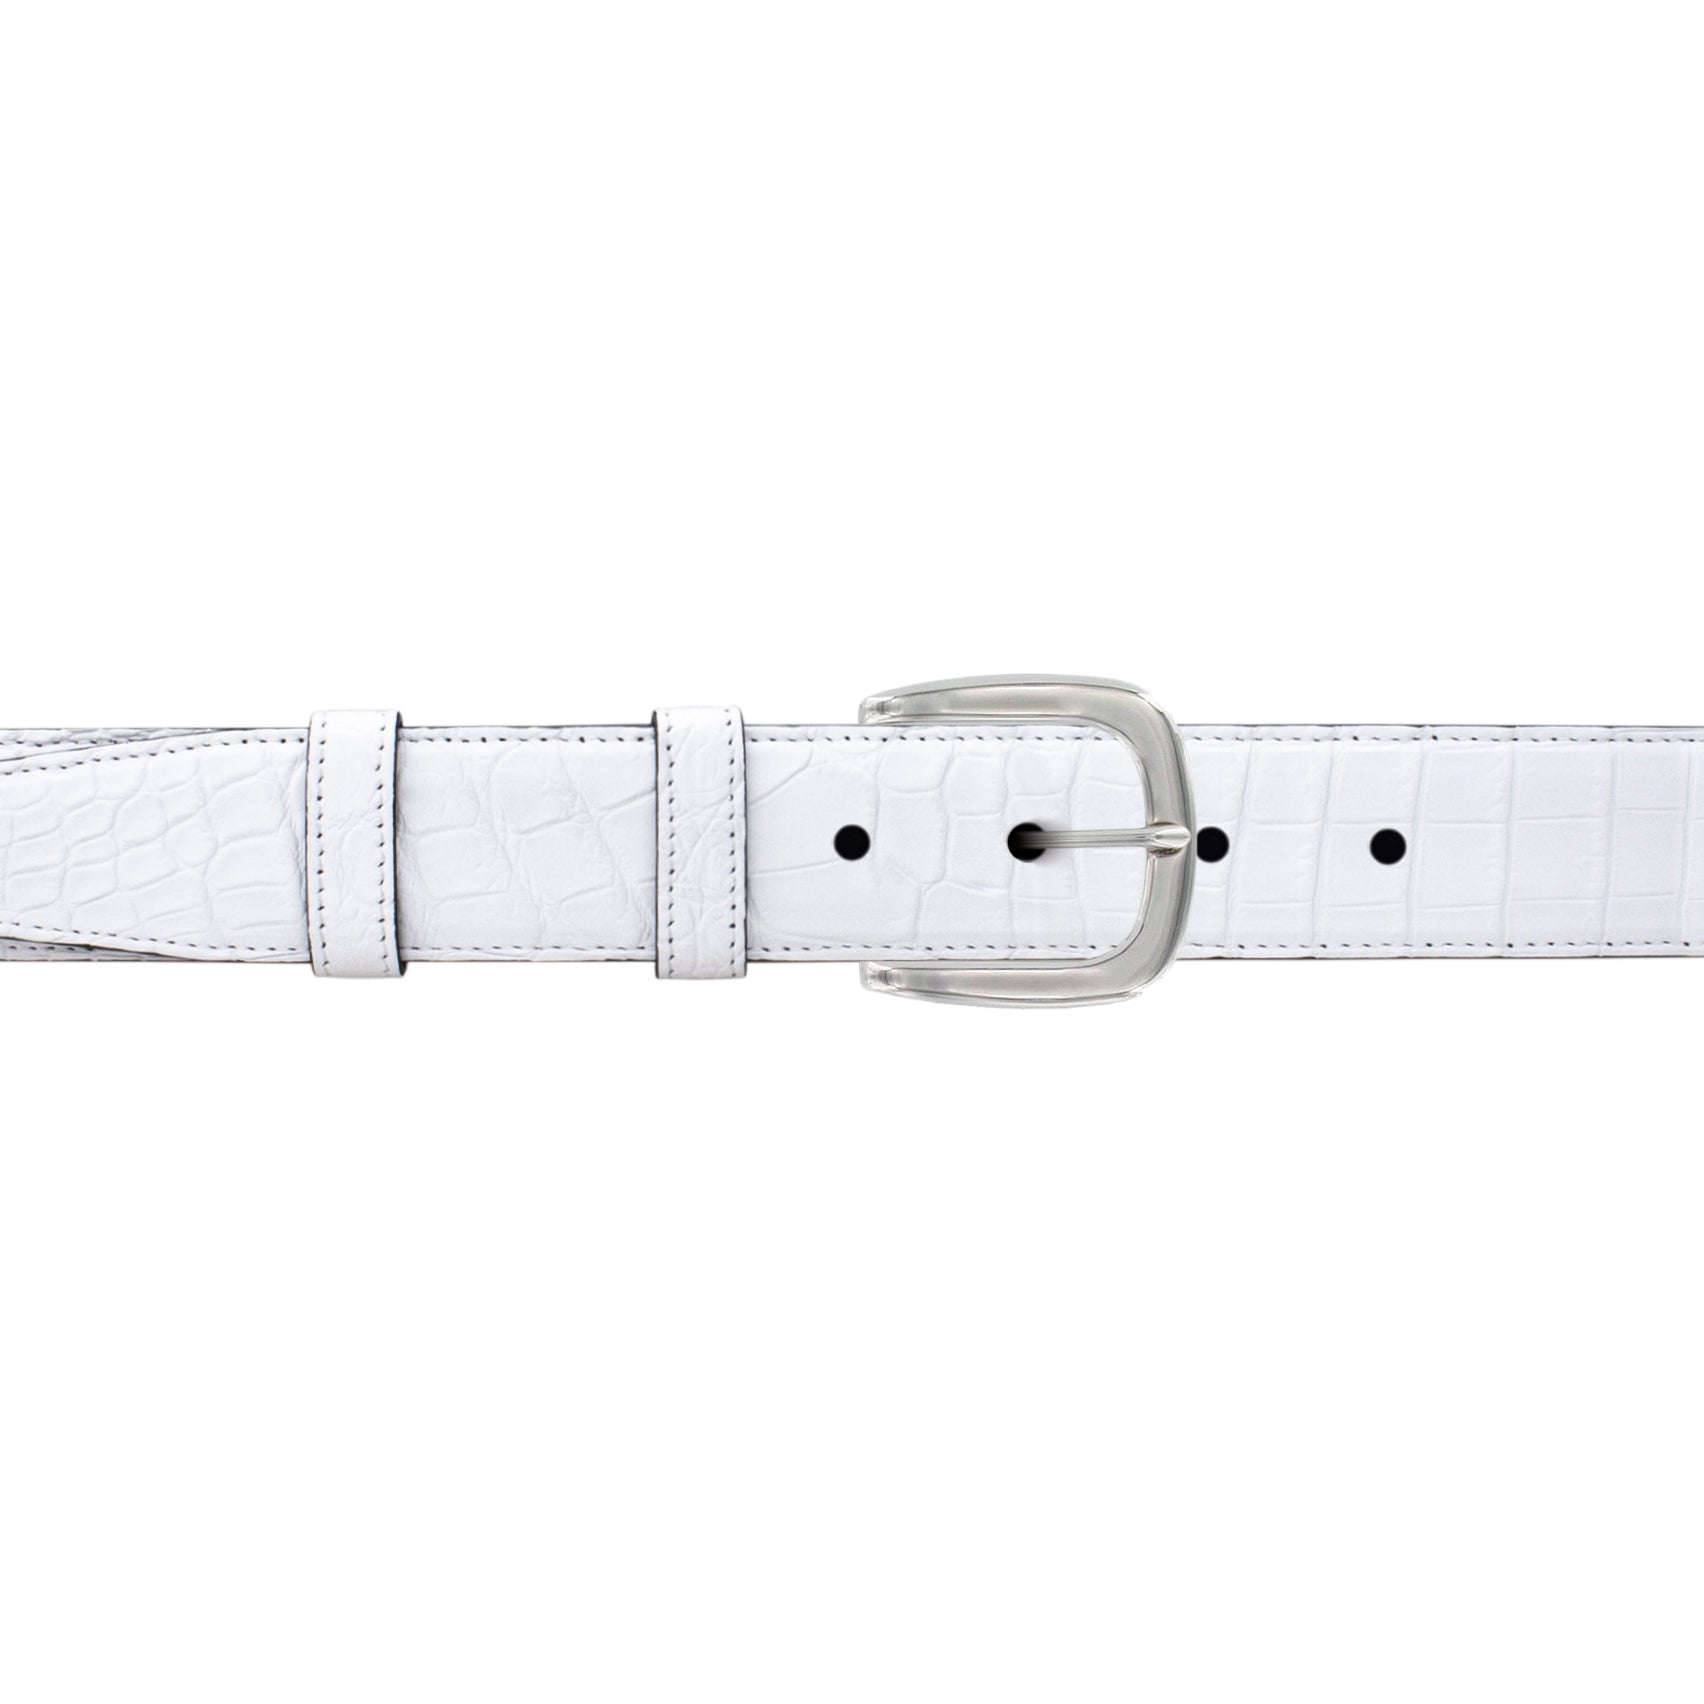 1 1/4" White Classic Belt with Oxford Cocktail Buckle in Polished Nickel